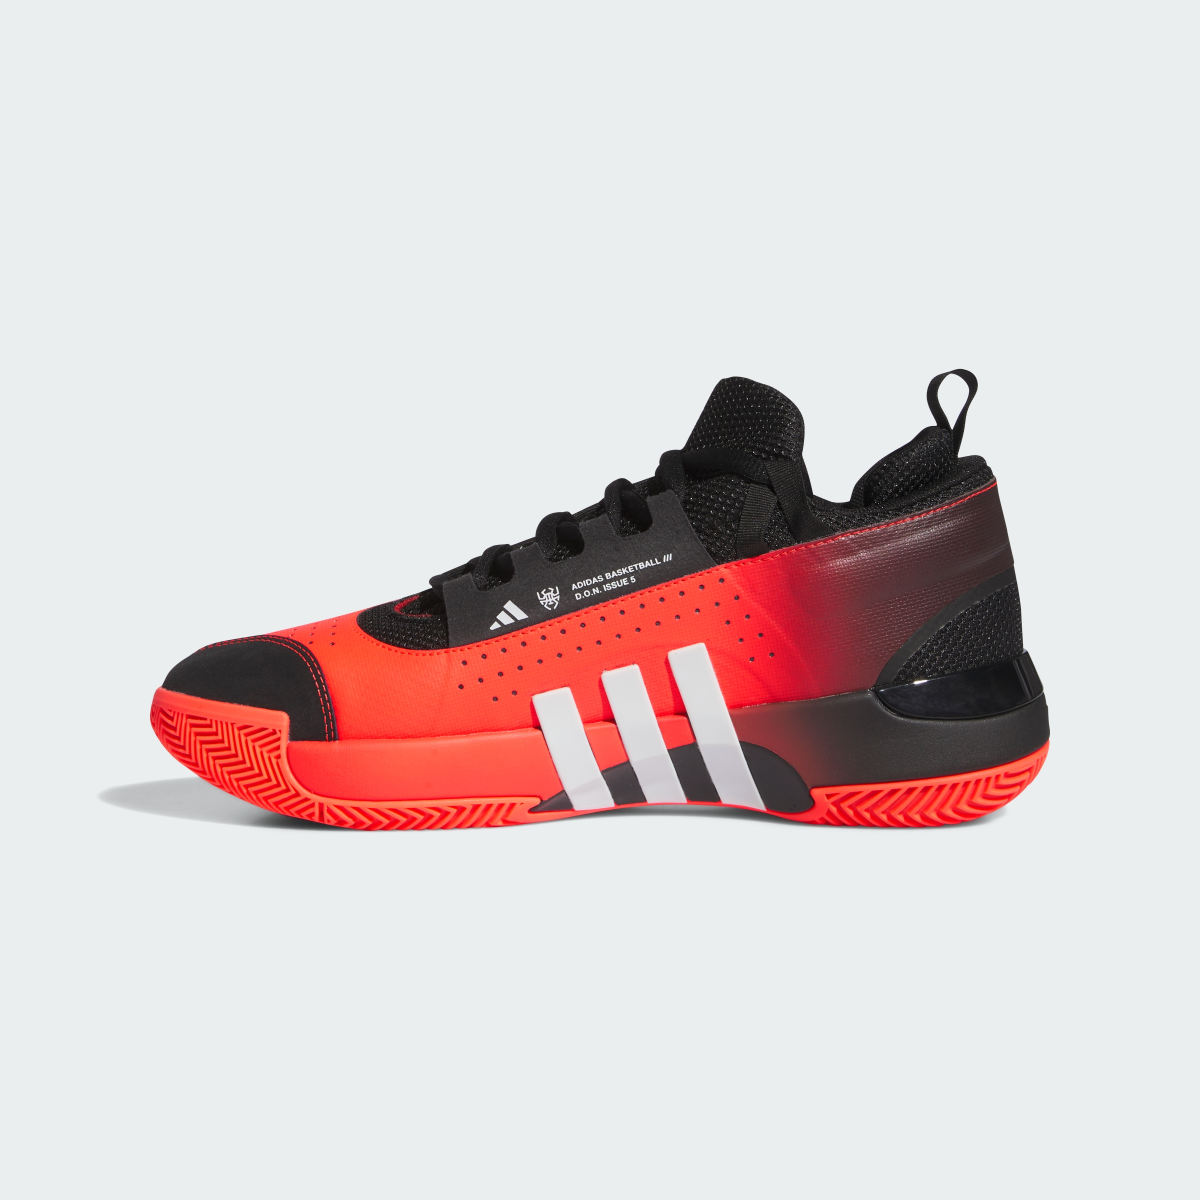 Adidas D.O.N Issue 5 Basketball Shoes. 7